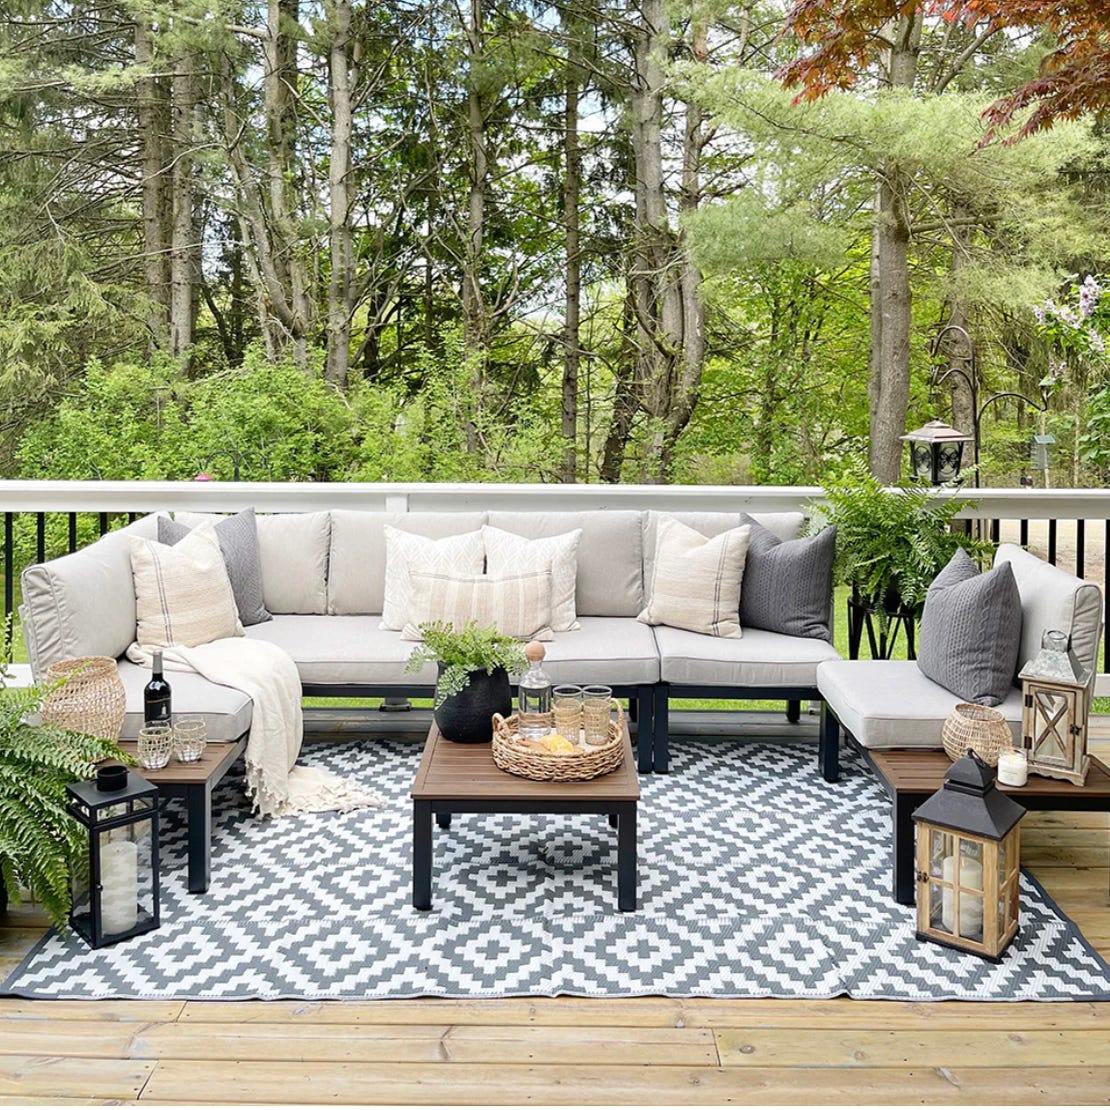 Outdoor patio setup with sectional sofa, patterned rug, two small tables, and decorative lanterns.